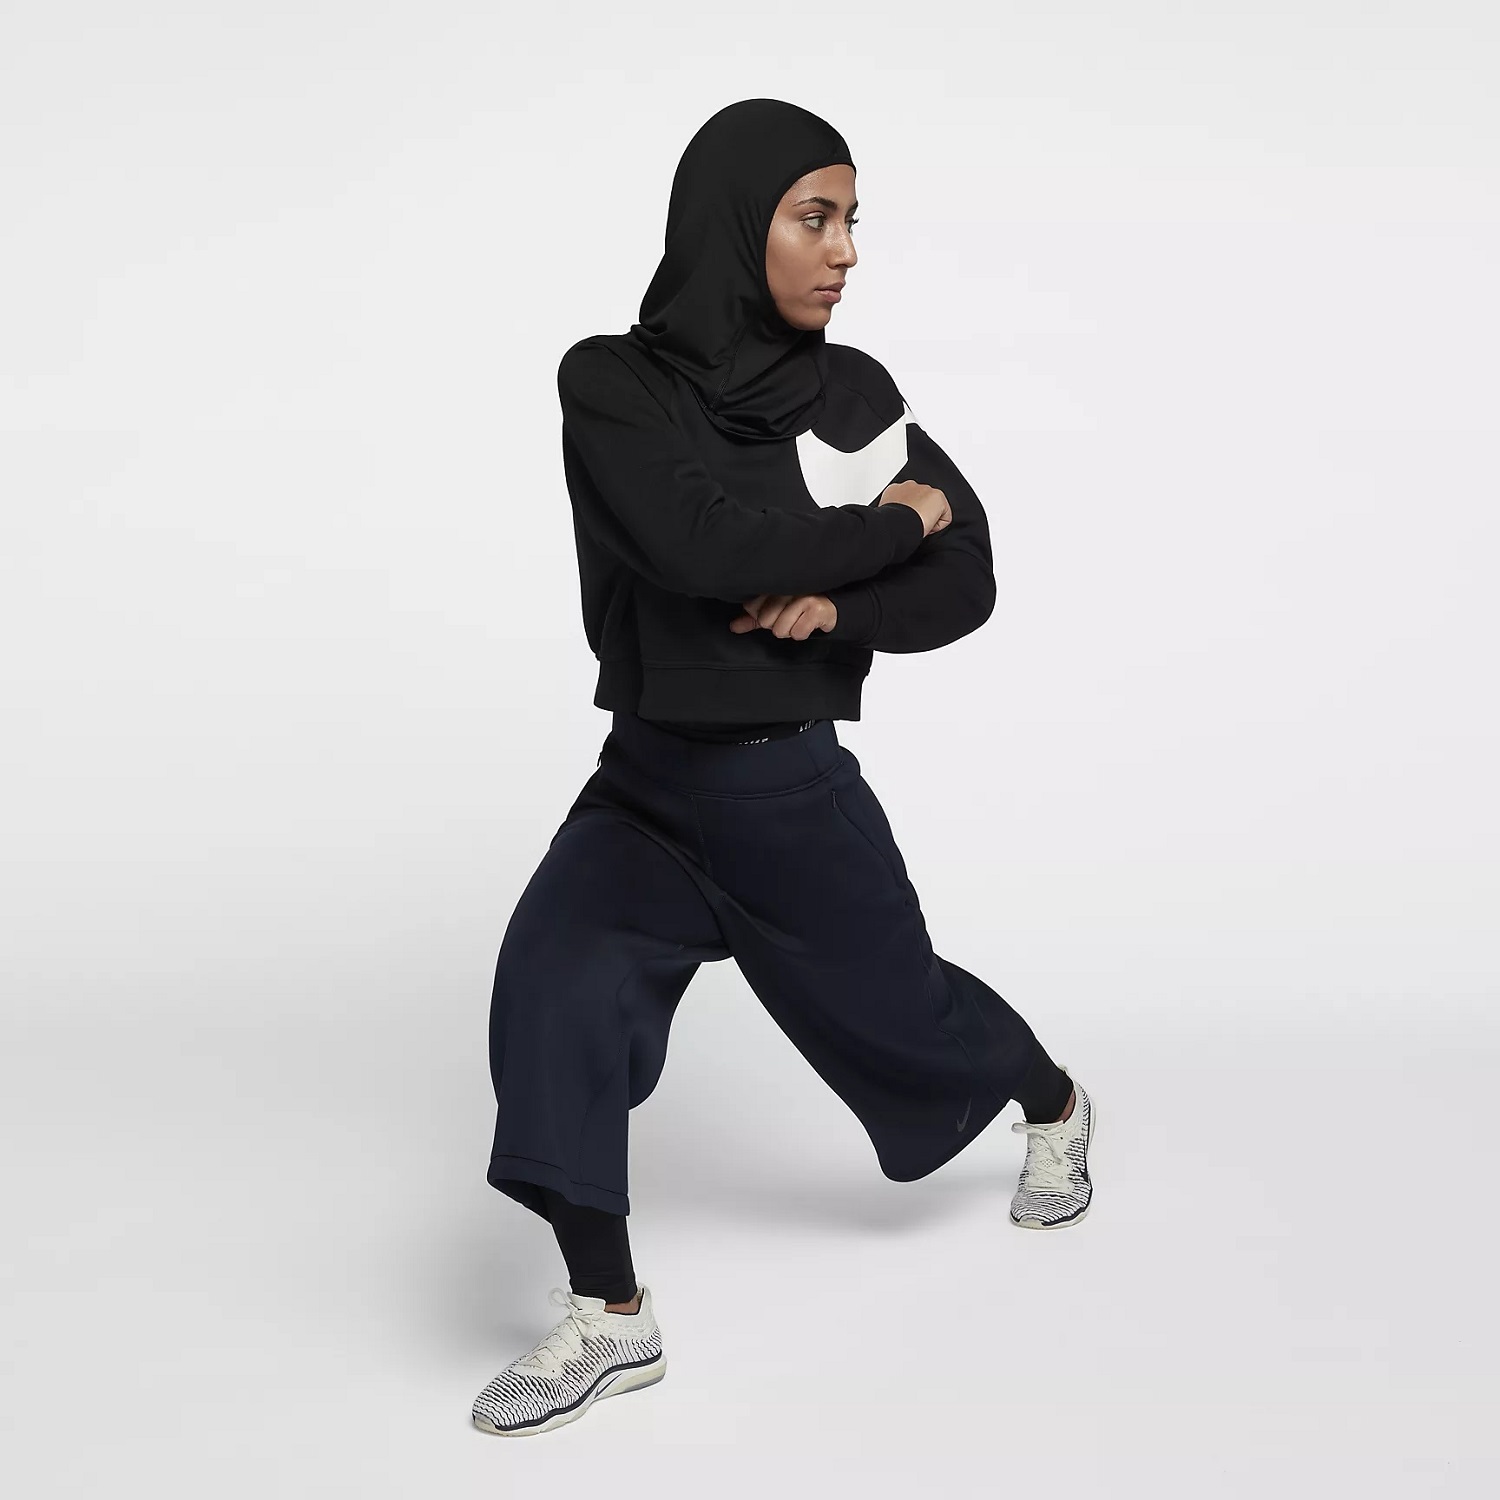 Nike Pro Hijab Now Available For Pre-Order